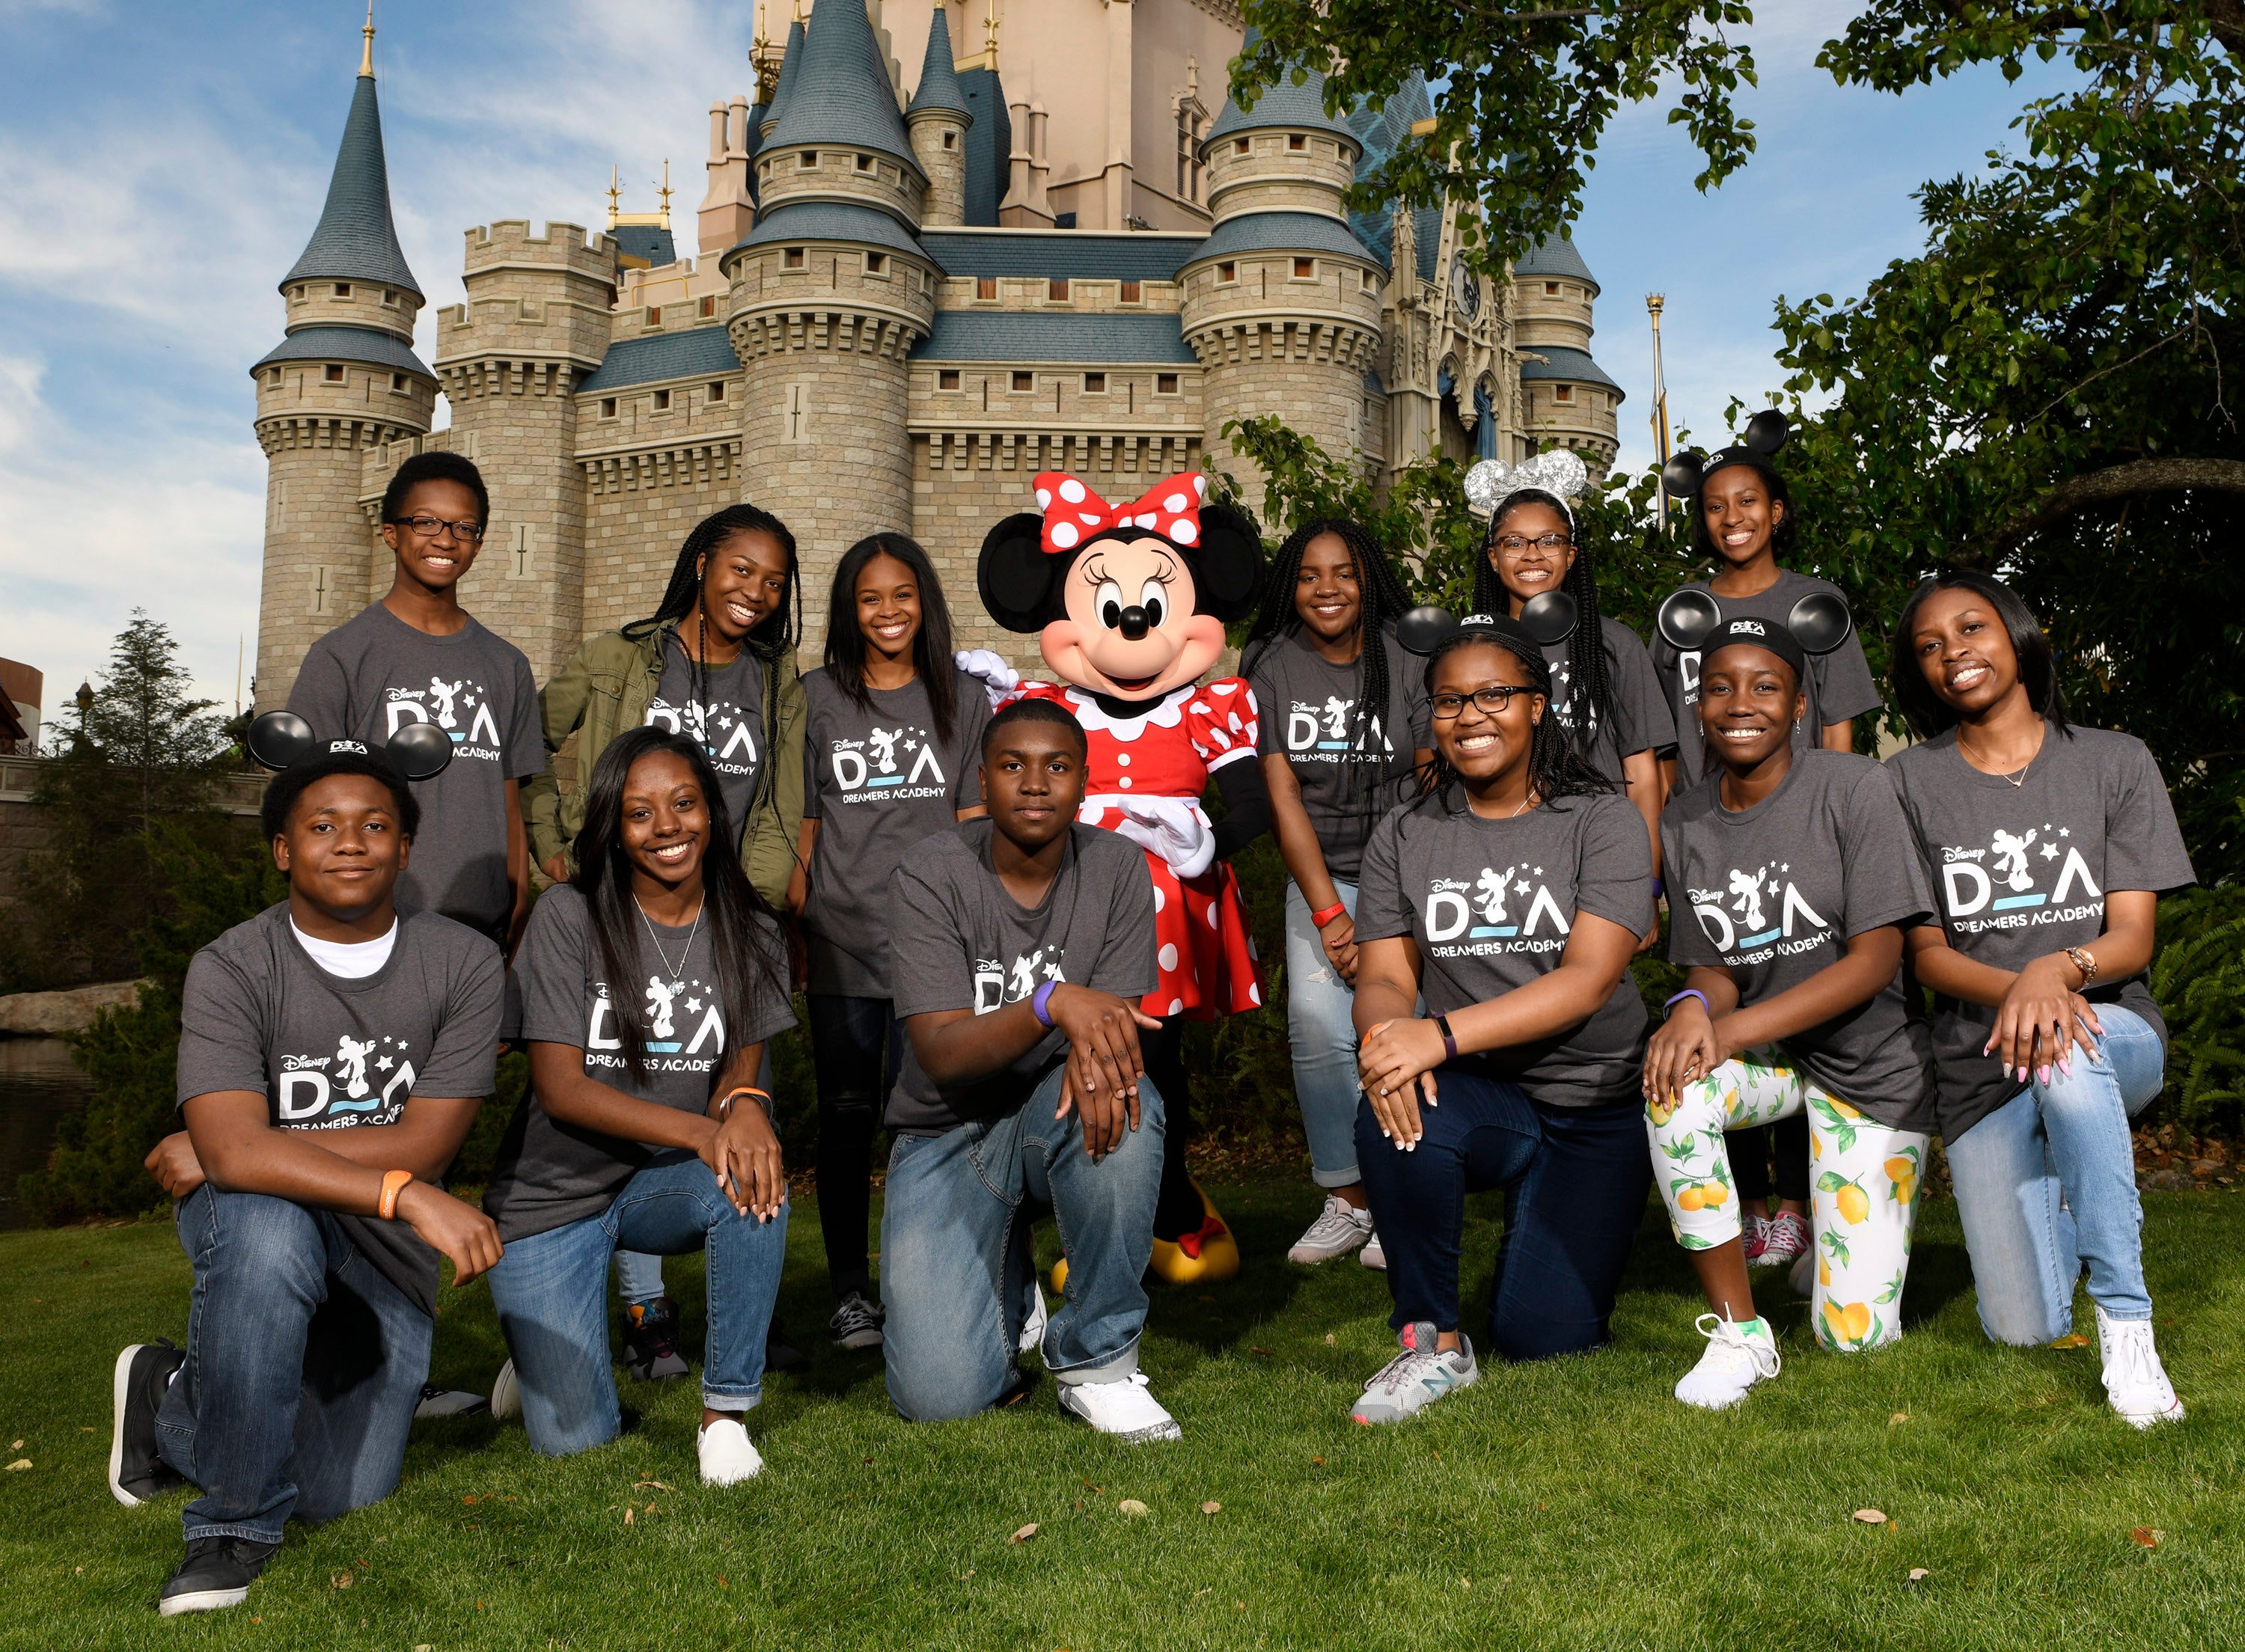 ESSENCE Communications President Michelle Ebanks On The Importance Of The Disney Dreamer's Academy